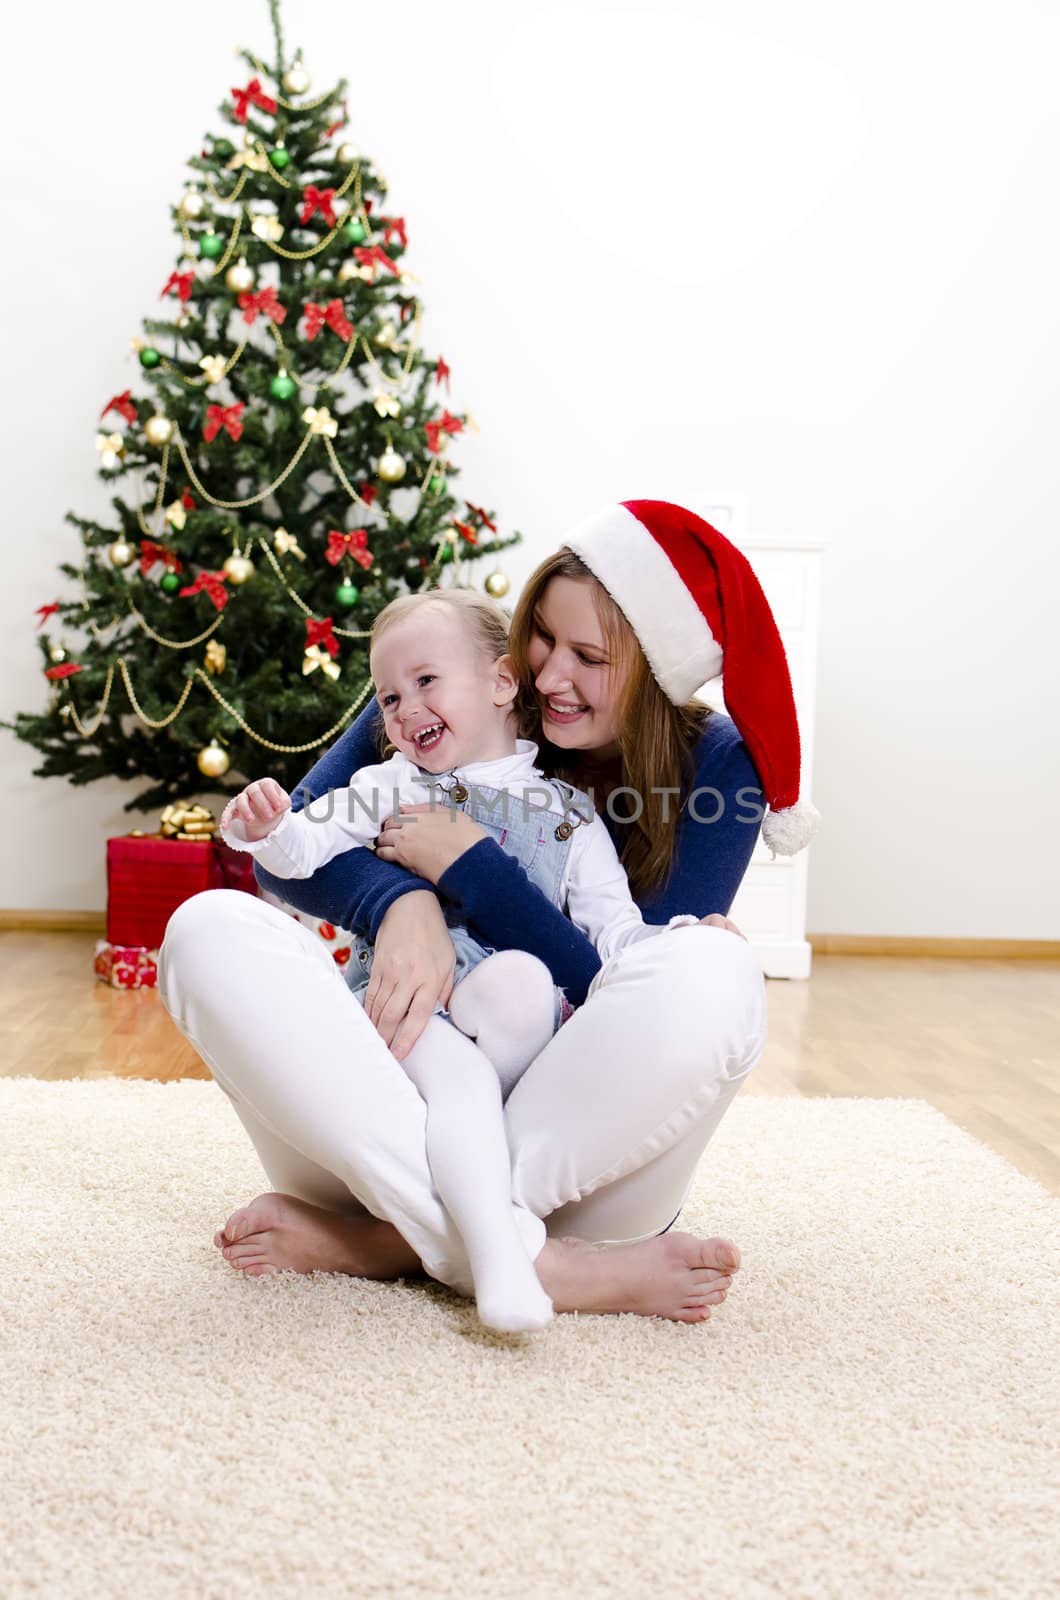 Little girl and her mom having fun at Christmas by dmitrimaruta